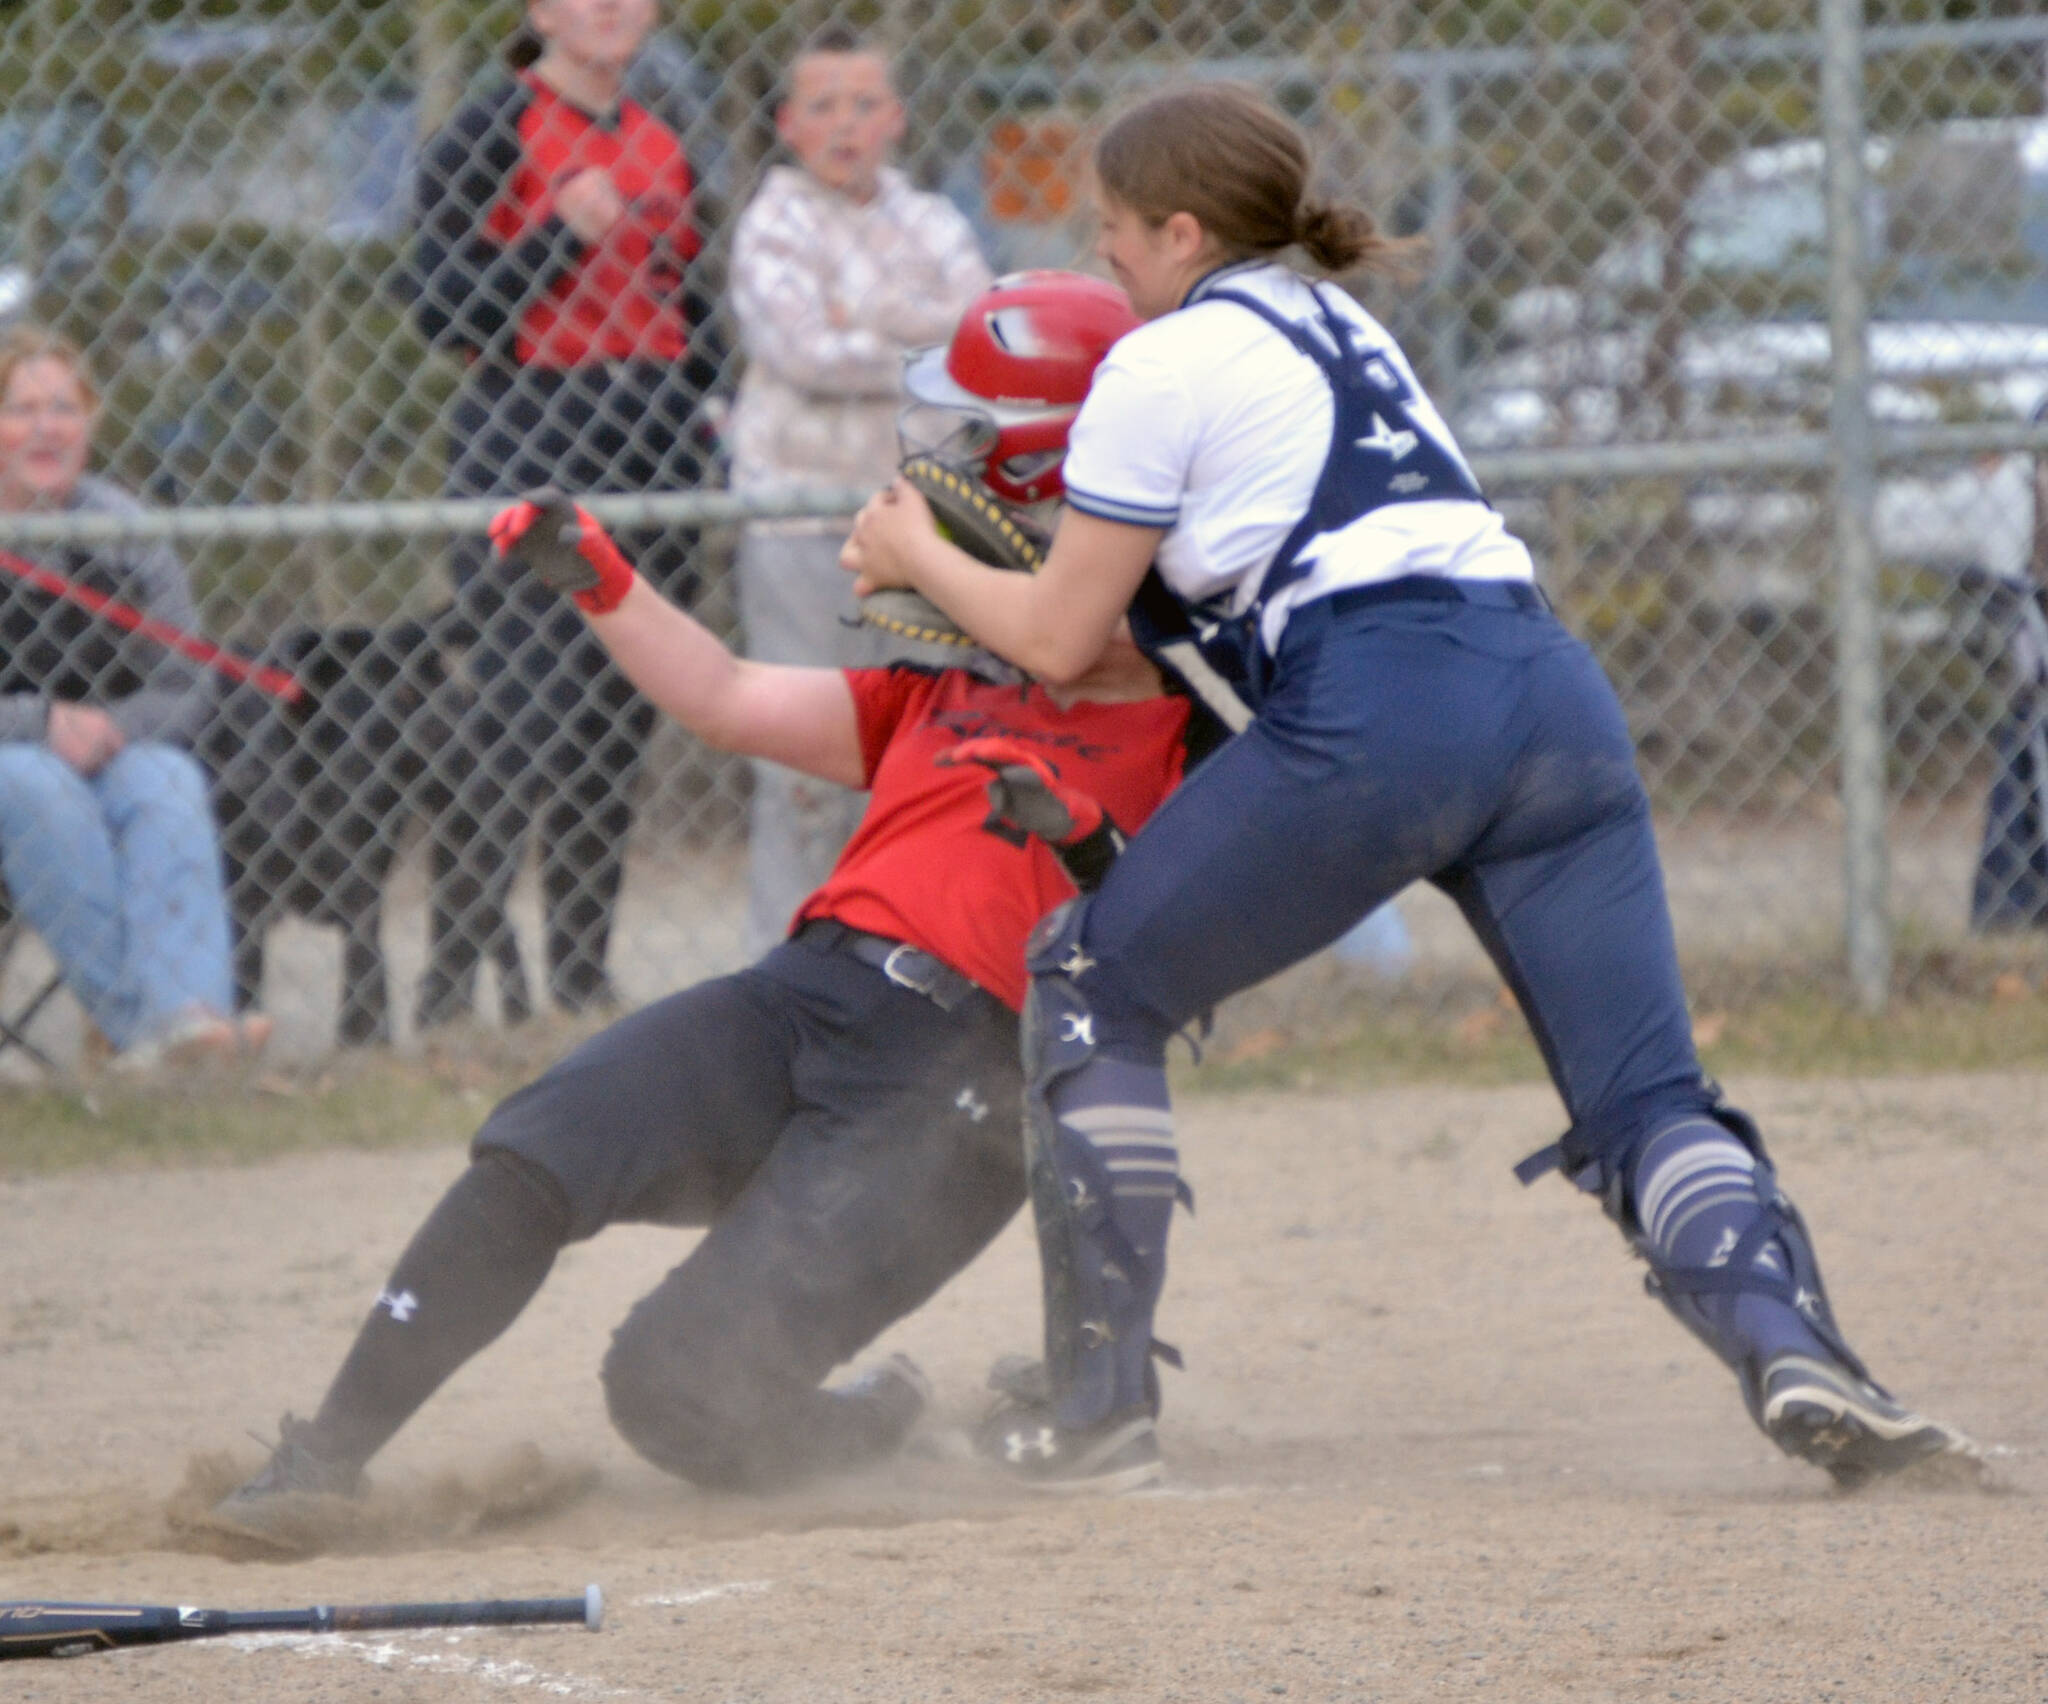 Soldotna catcher Bailey Conner tags out Kenai Central's Kailey Stynsberg on Monday, May 16, 2022, at the Soldotna Little League fields in Soldotna, Alaska. (Photo by Jeff Helminiak/Peninsula Clarion)